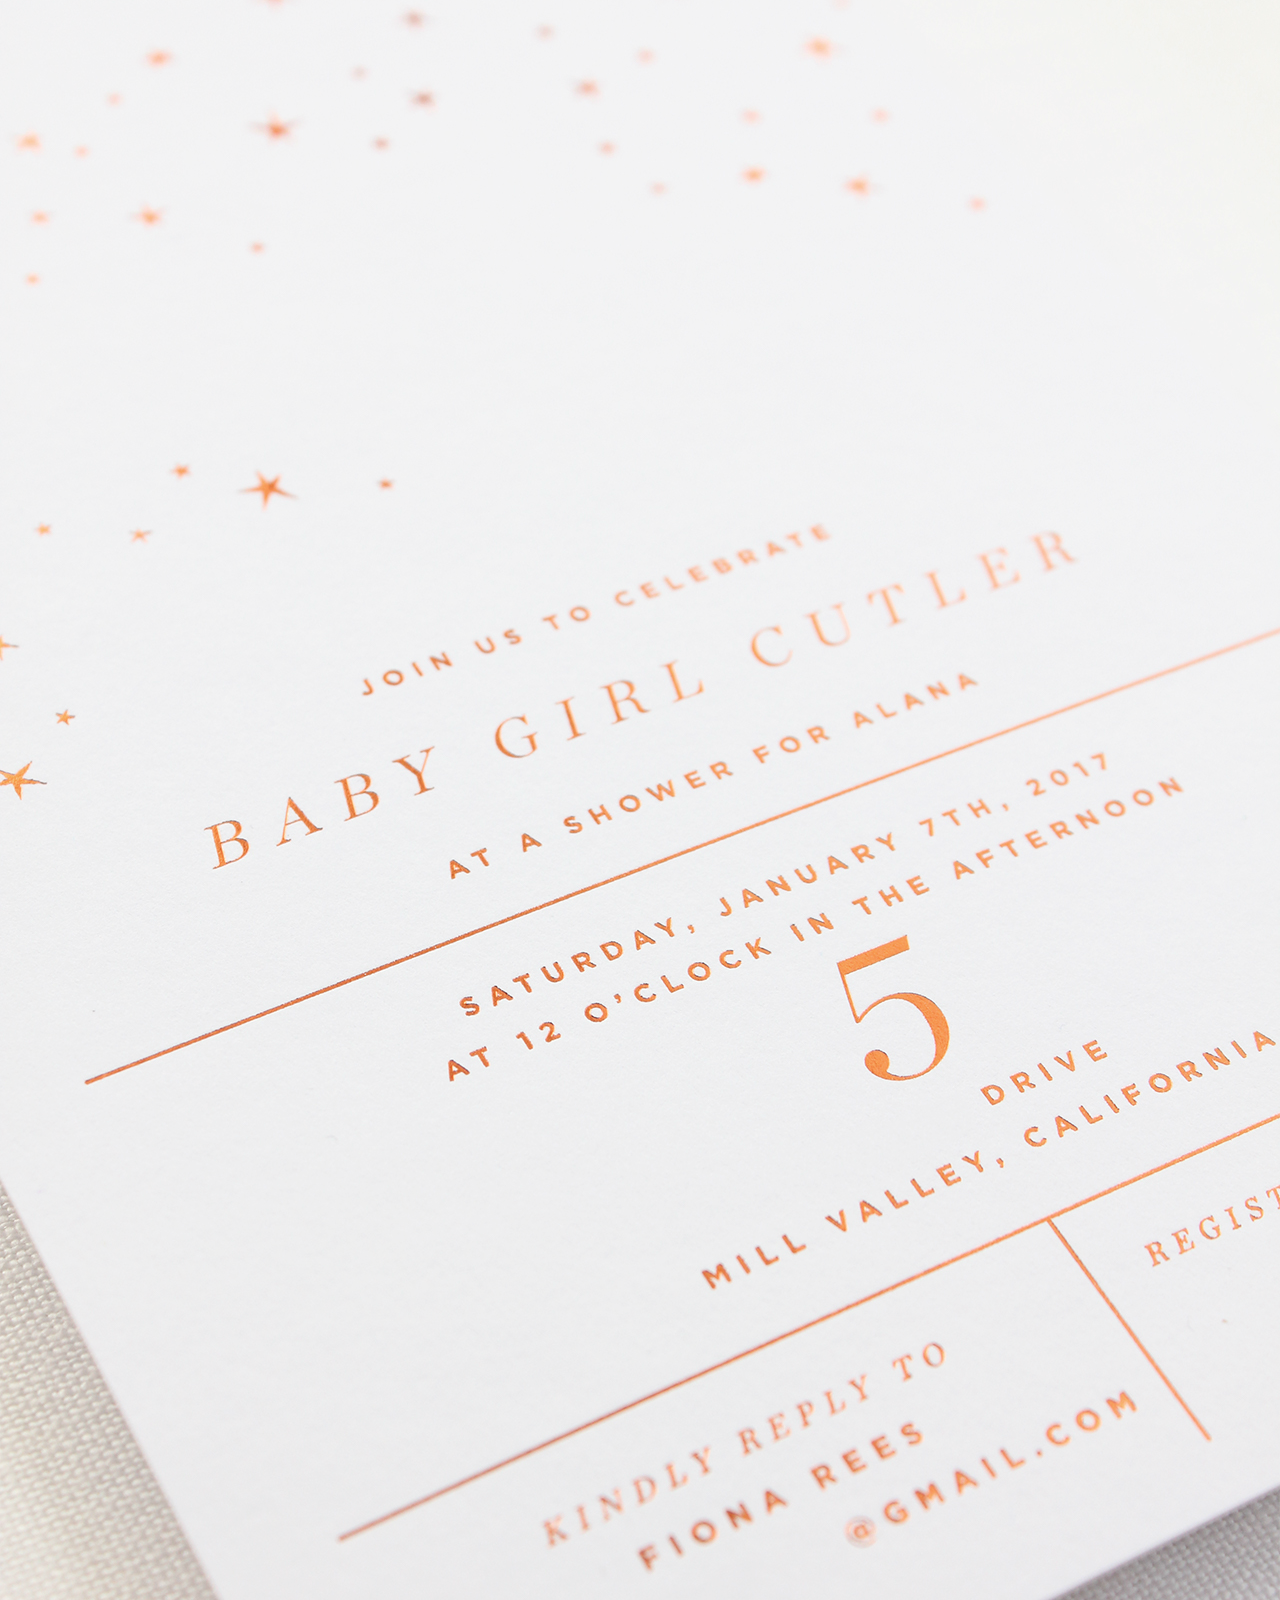 Copper Foil Star Inspired Baby Shower Invitations by Bourne Paper Co.